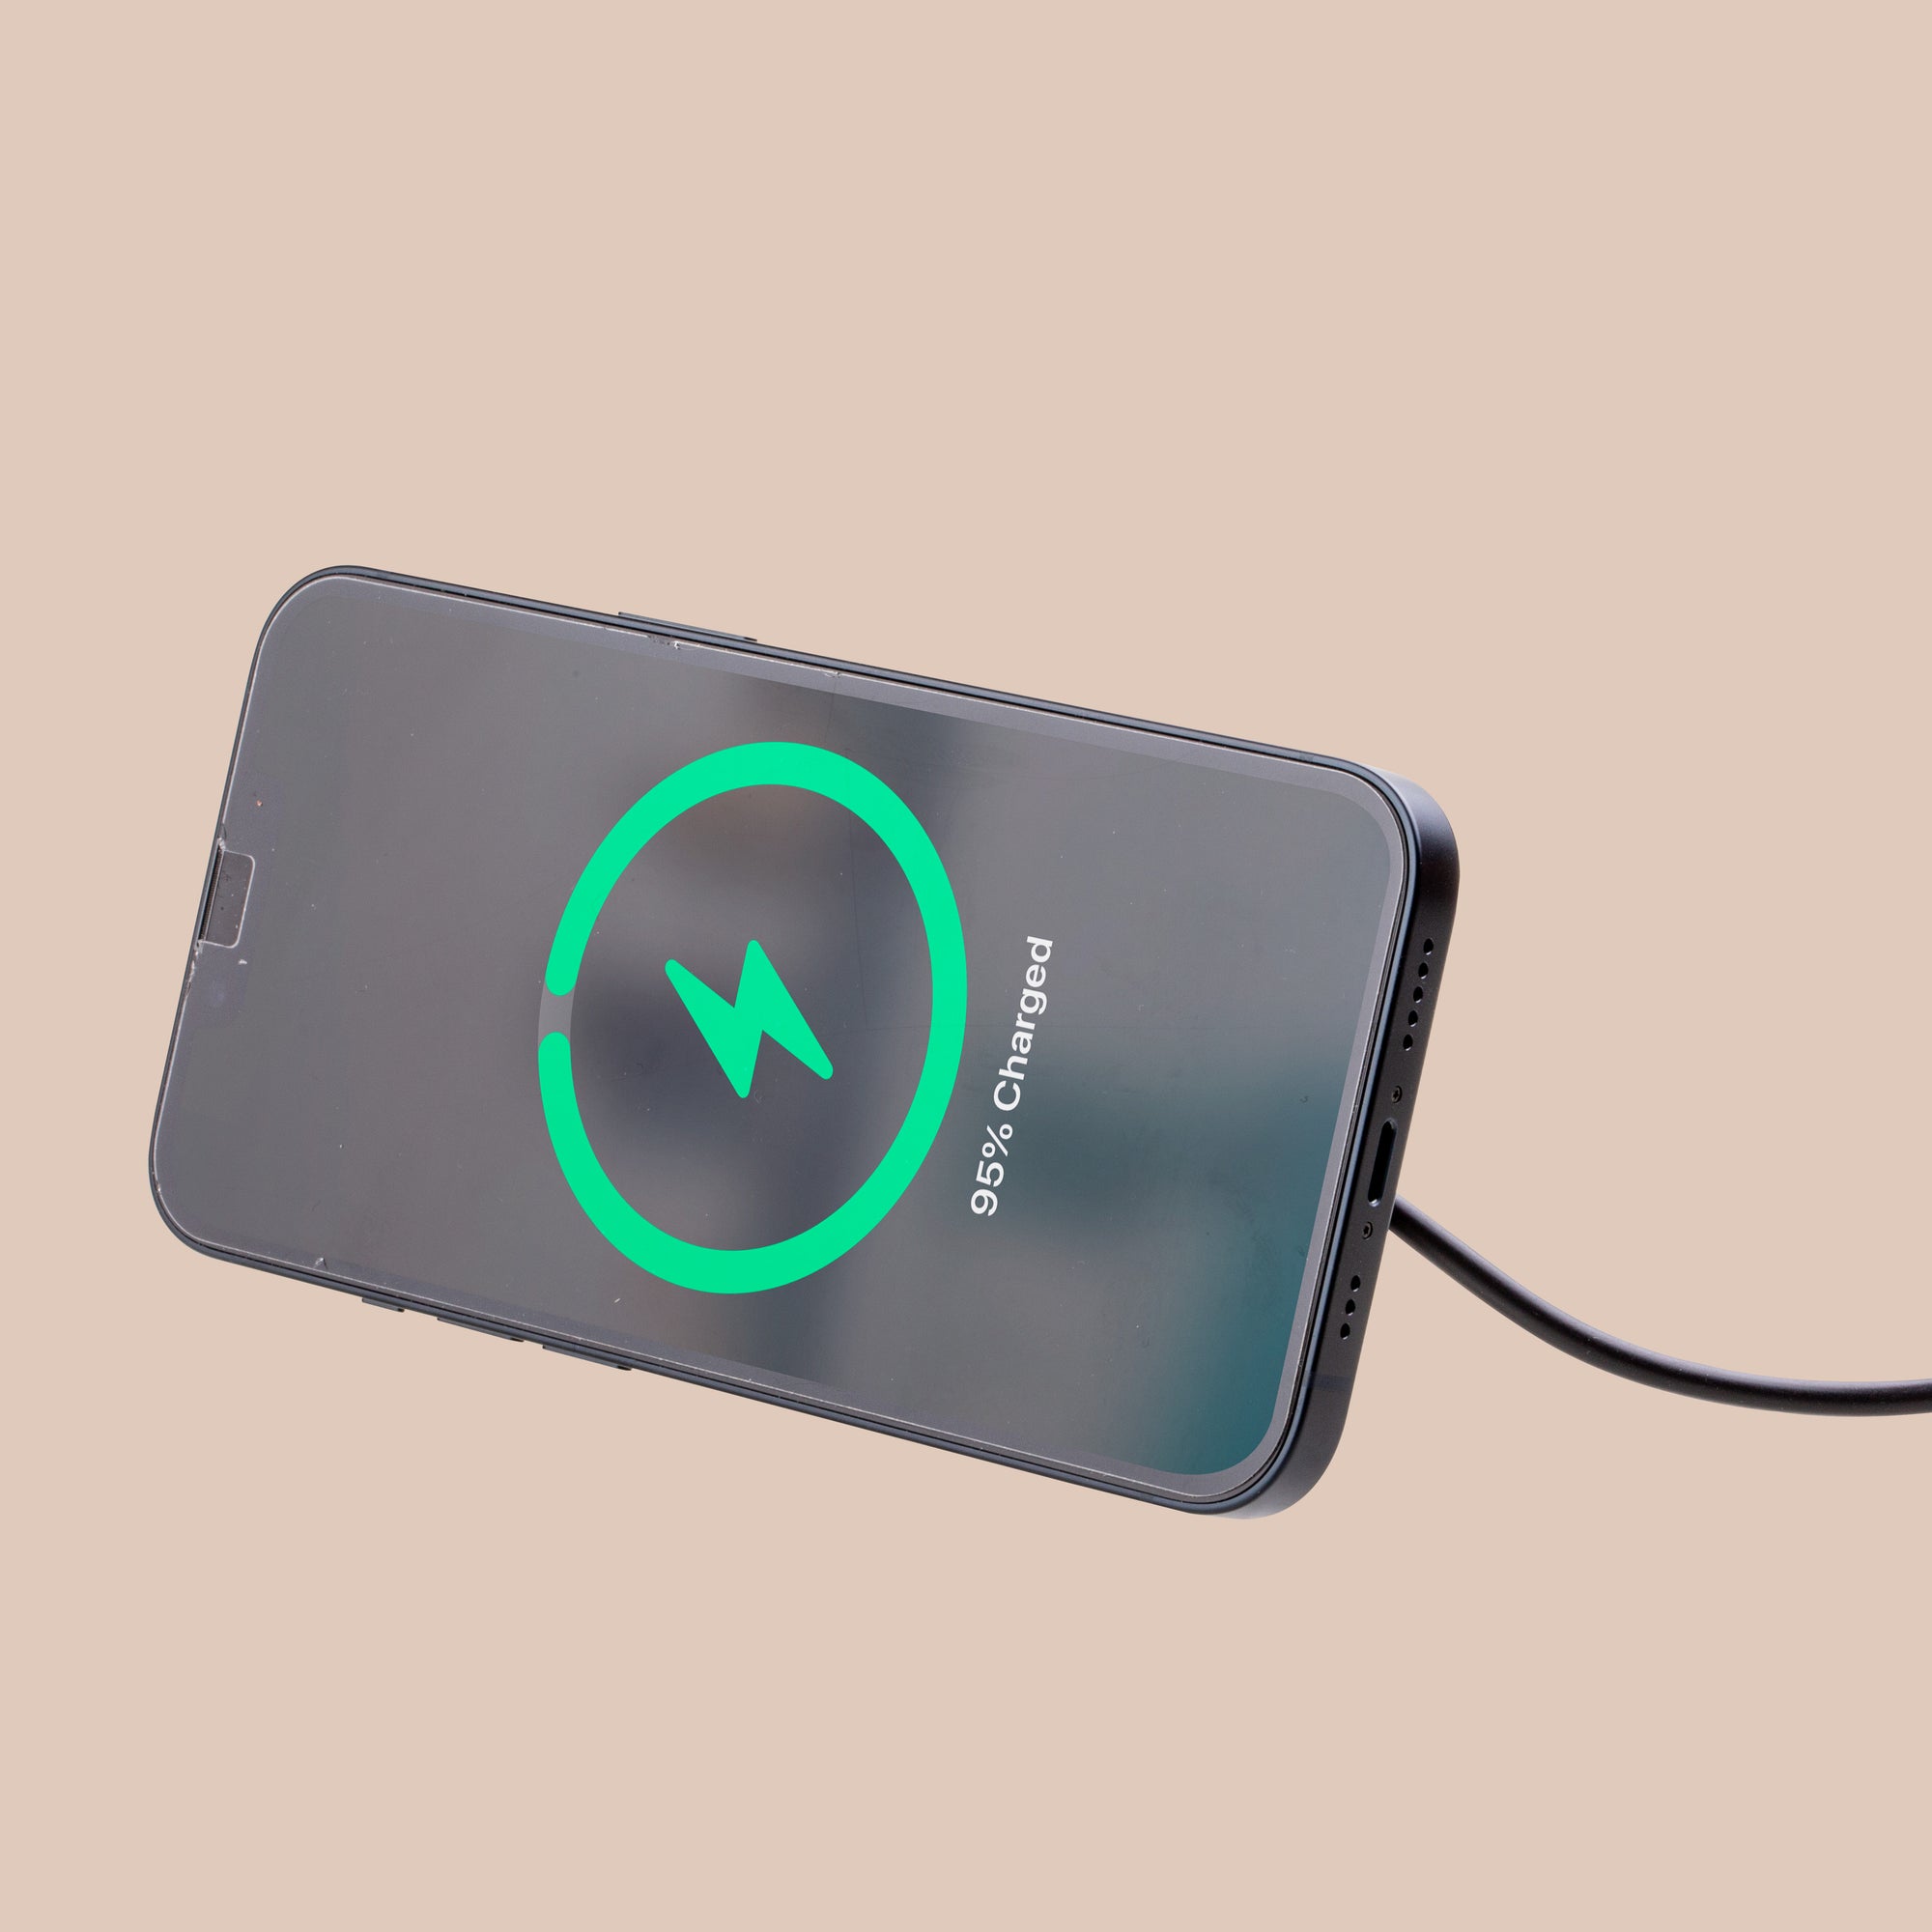 Copper Rocks Wireless Charger